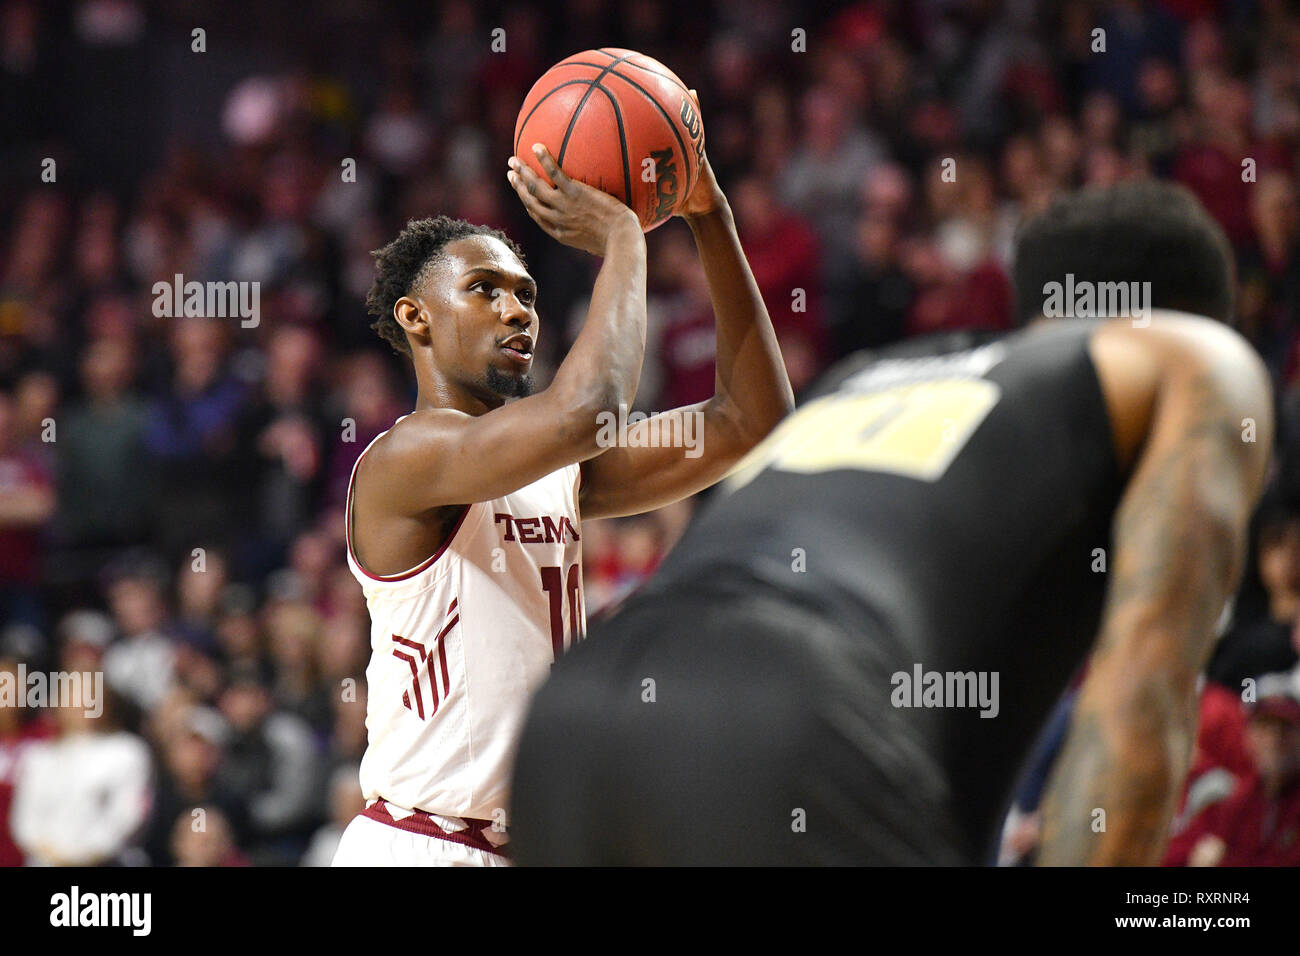 Philadelphia, Pennsylvania, USA. 9th Mar, 2019. Temple Owls guard SHIZZ ALSTON JR. (10) shoots a free throw during the American Athletic Conference basketball game played at the Liacouras Center in Philadelphia. Temple beat #25 UCF 67-62. Credit: Ken Inness/ZUMA Wire/Alamy Live News Stock Photo